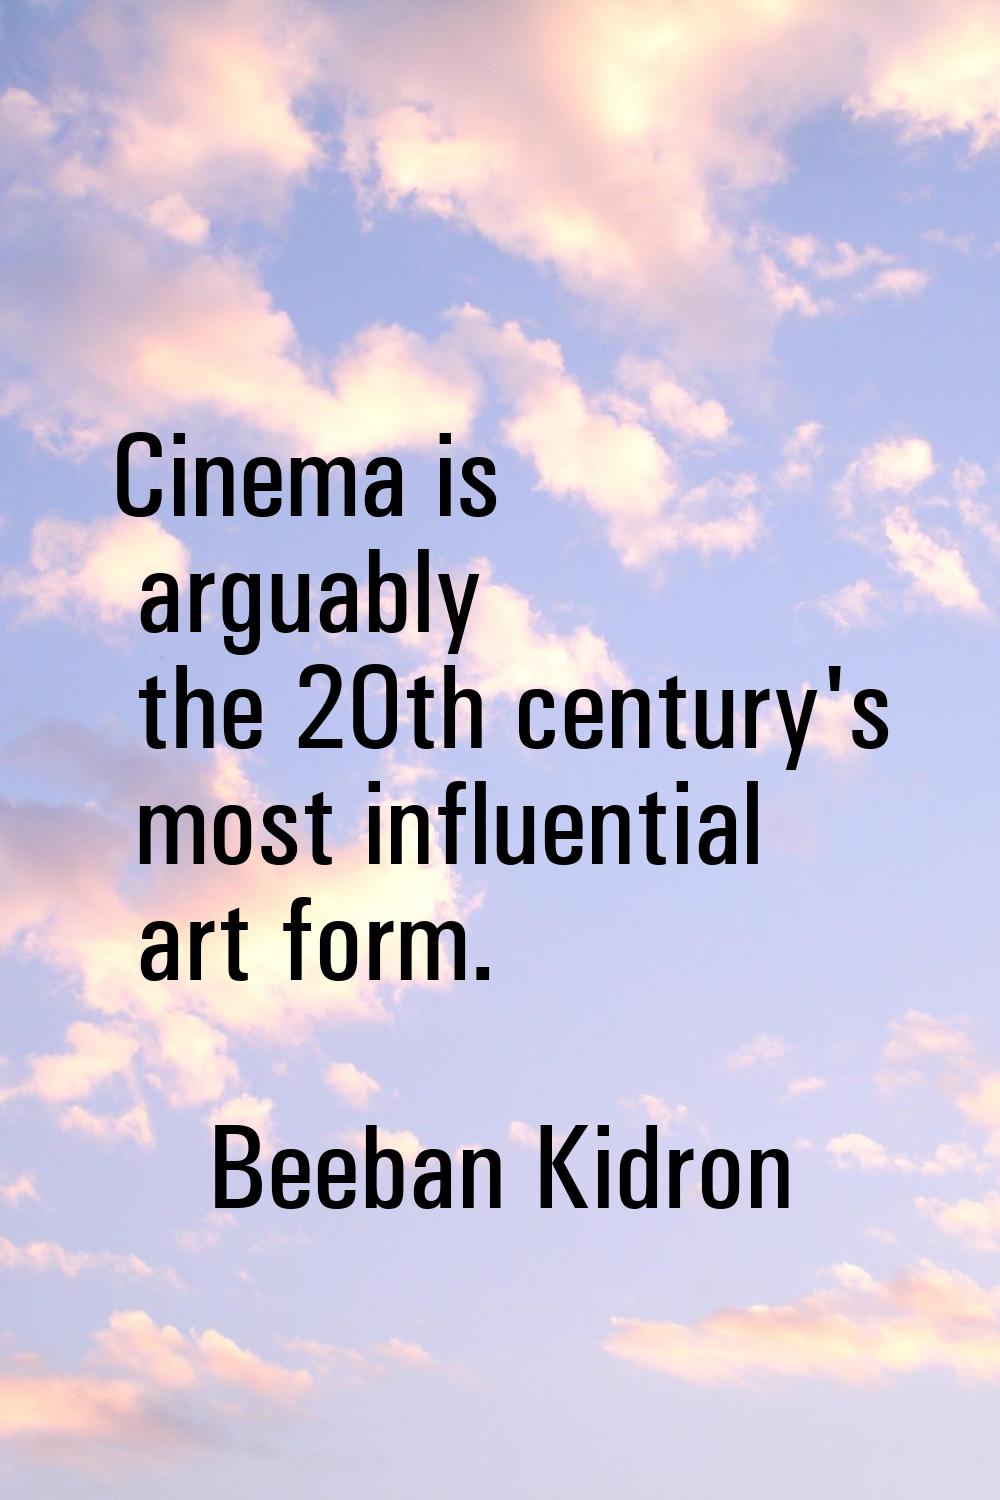 Cinema is arguably the 20th century's most influential art form.